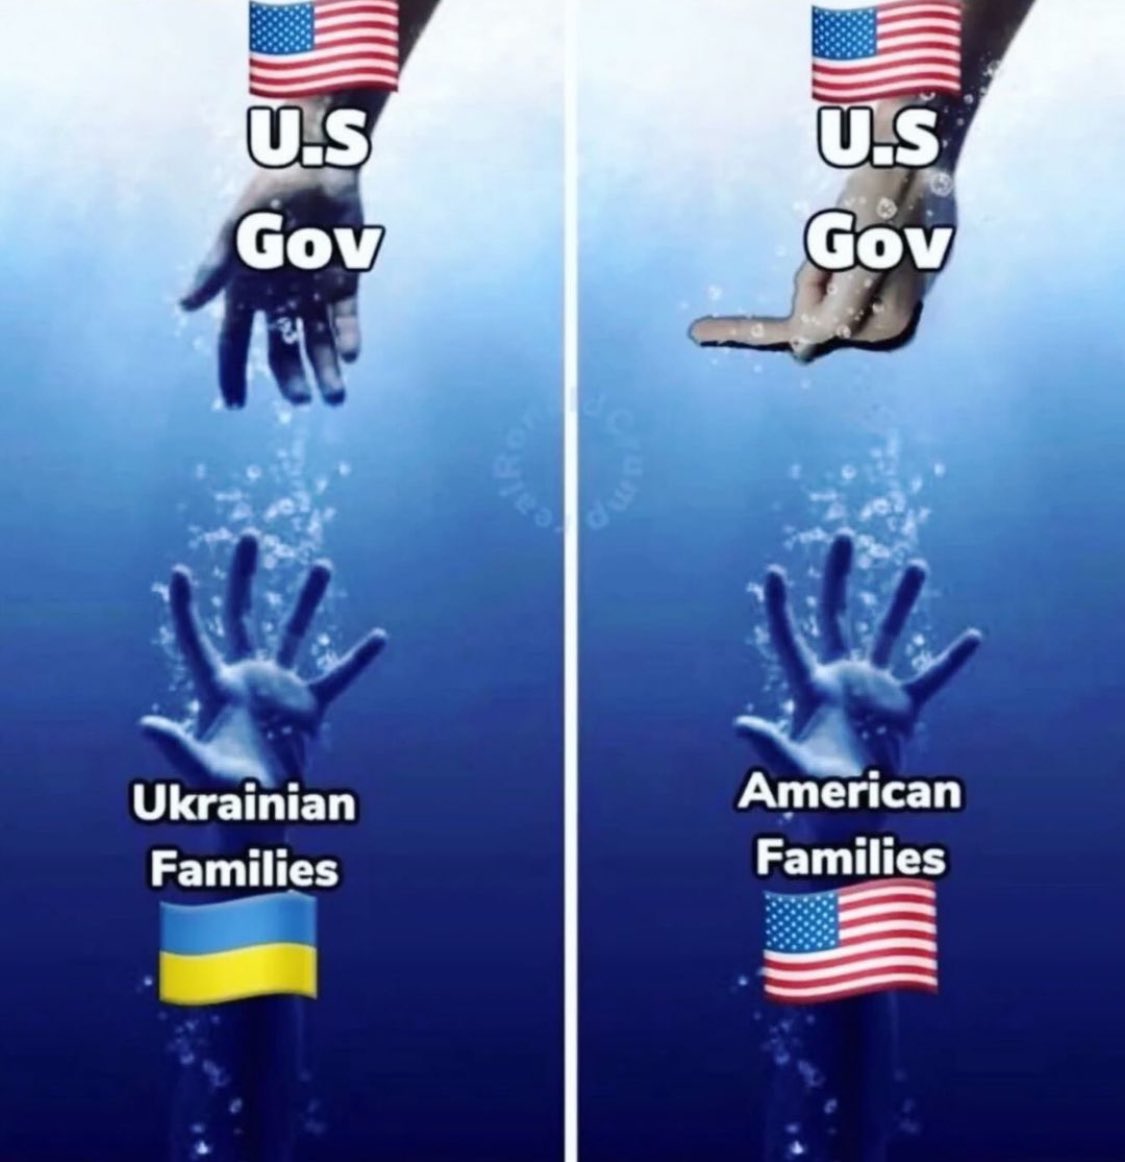 This is a great representation of what this Biden government thinks about us versus Ukraine.